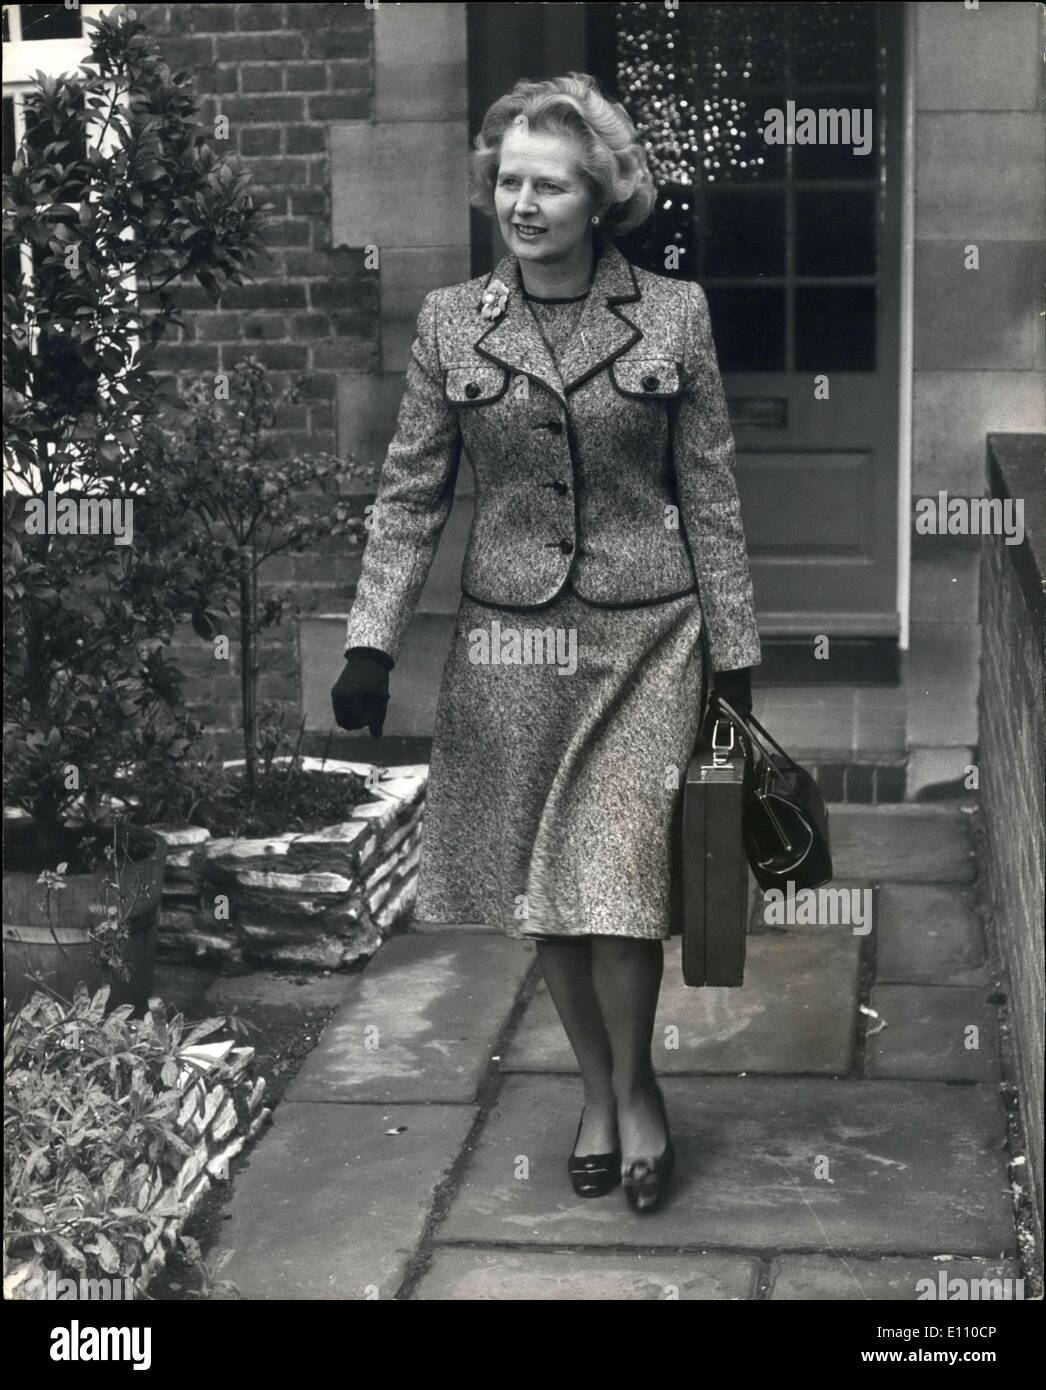 Feb. 04, 1975 - Today's Ballot for Tory Party Leadership: The first ballot in the election for leadership of the Conservative Party took place today at the House of Commons. Photo shows Mrs. Margaret Thatcher, one of the candidates, leaving her Chelsea home today for the Commons. Stock Photo